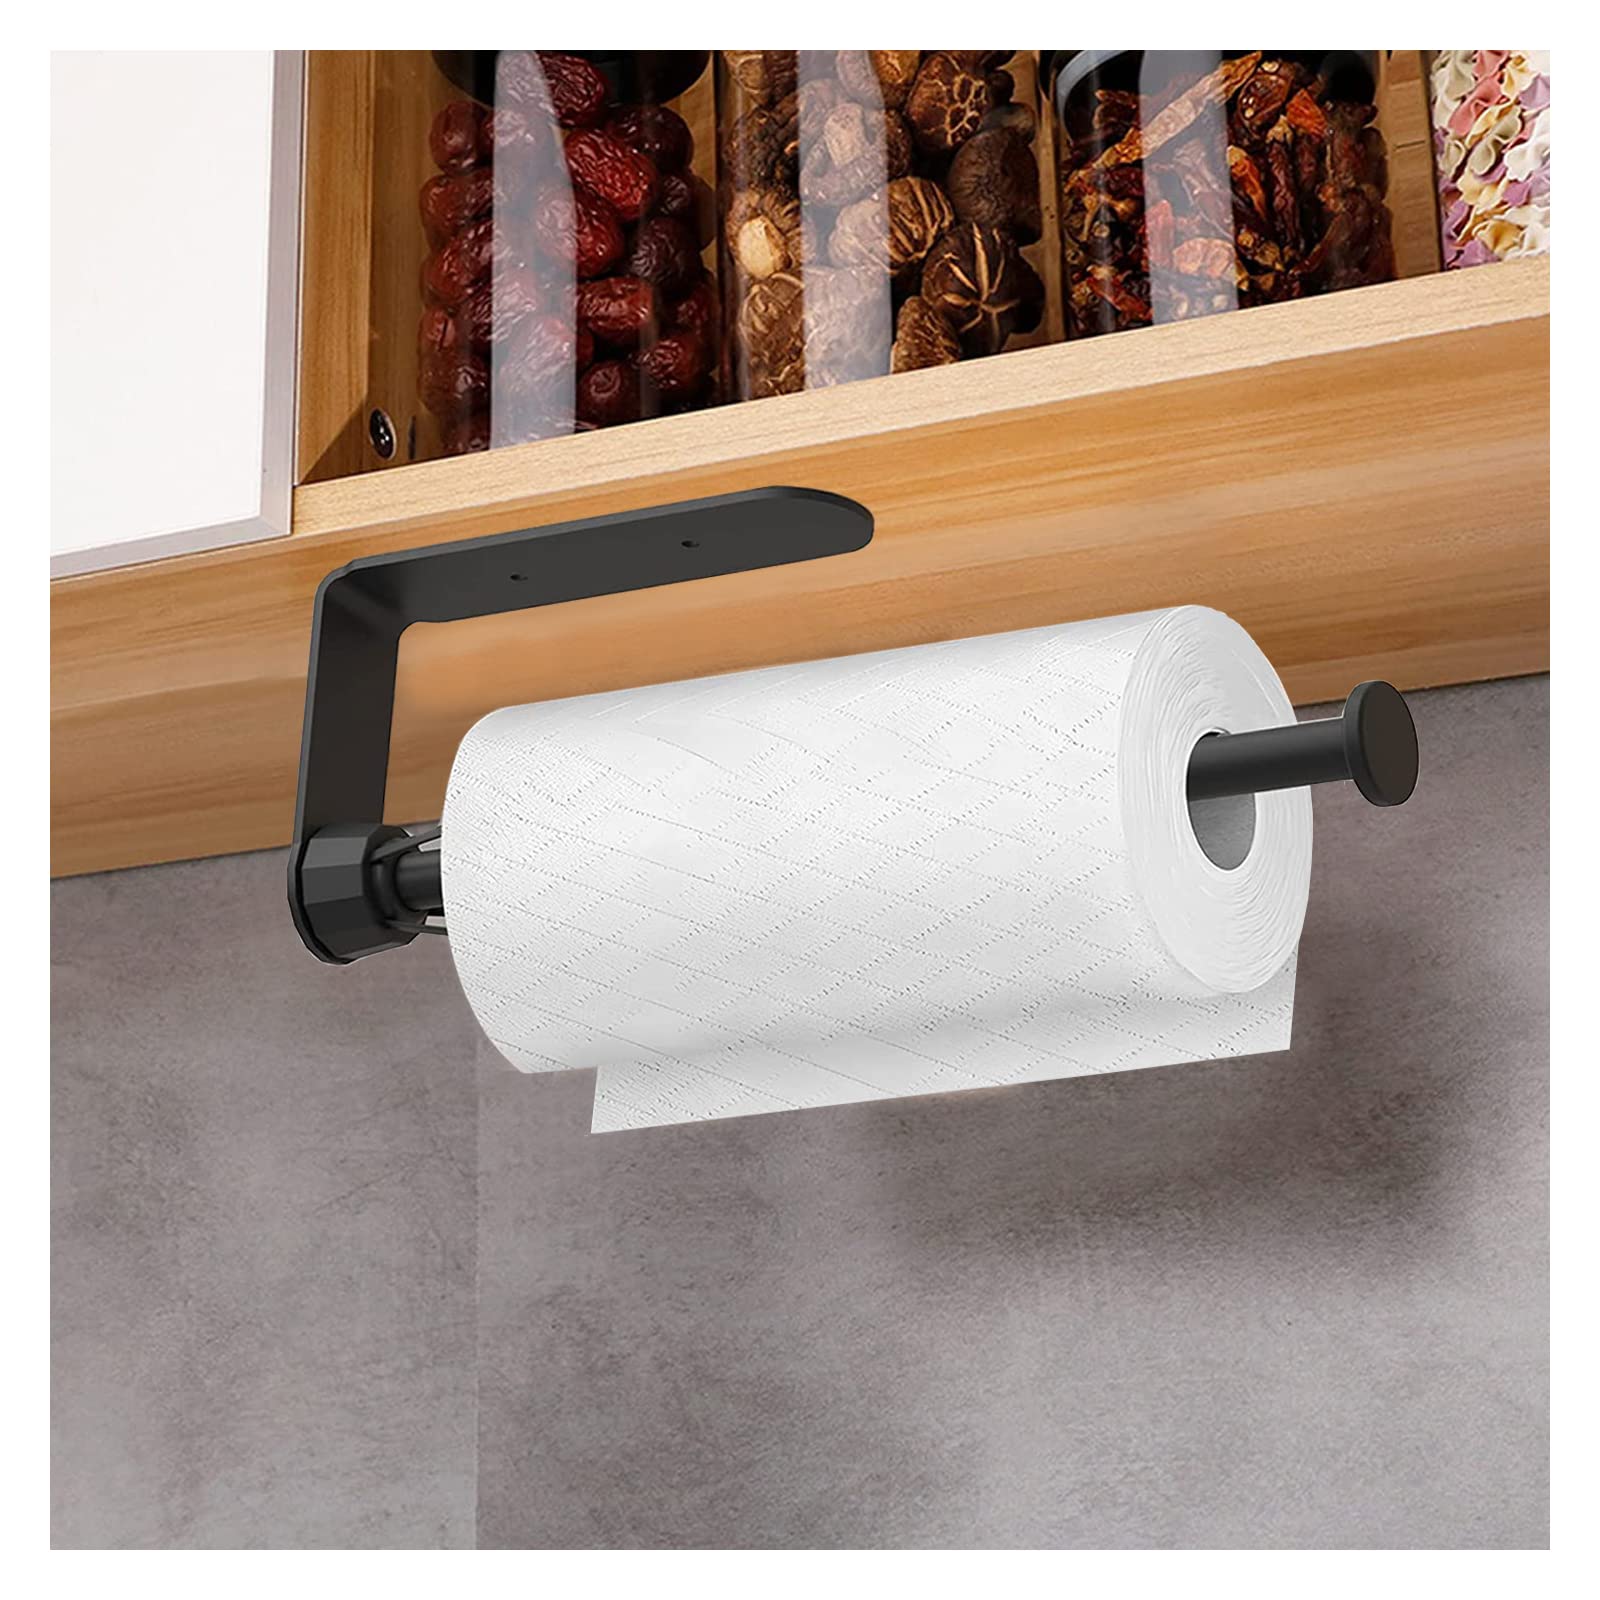 2 Pack Metal Paper Towel Holder, Easy Tear with Damping Function, Single Hand Operable Wall Mount Paper Towel Holder, Self-Adhesive or Drilled for Kitchen,Under Cabinet, Bathroom. Black